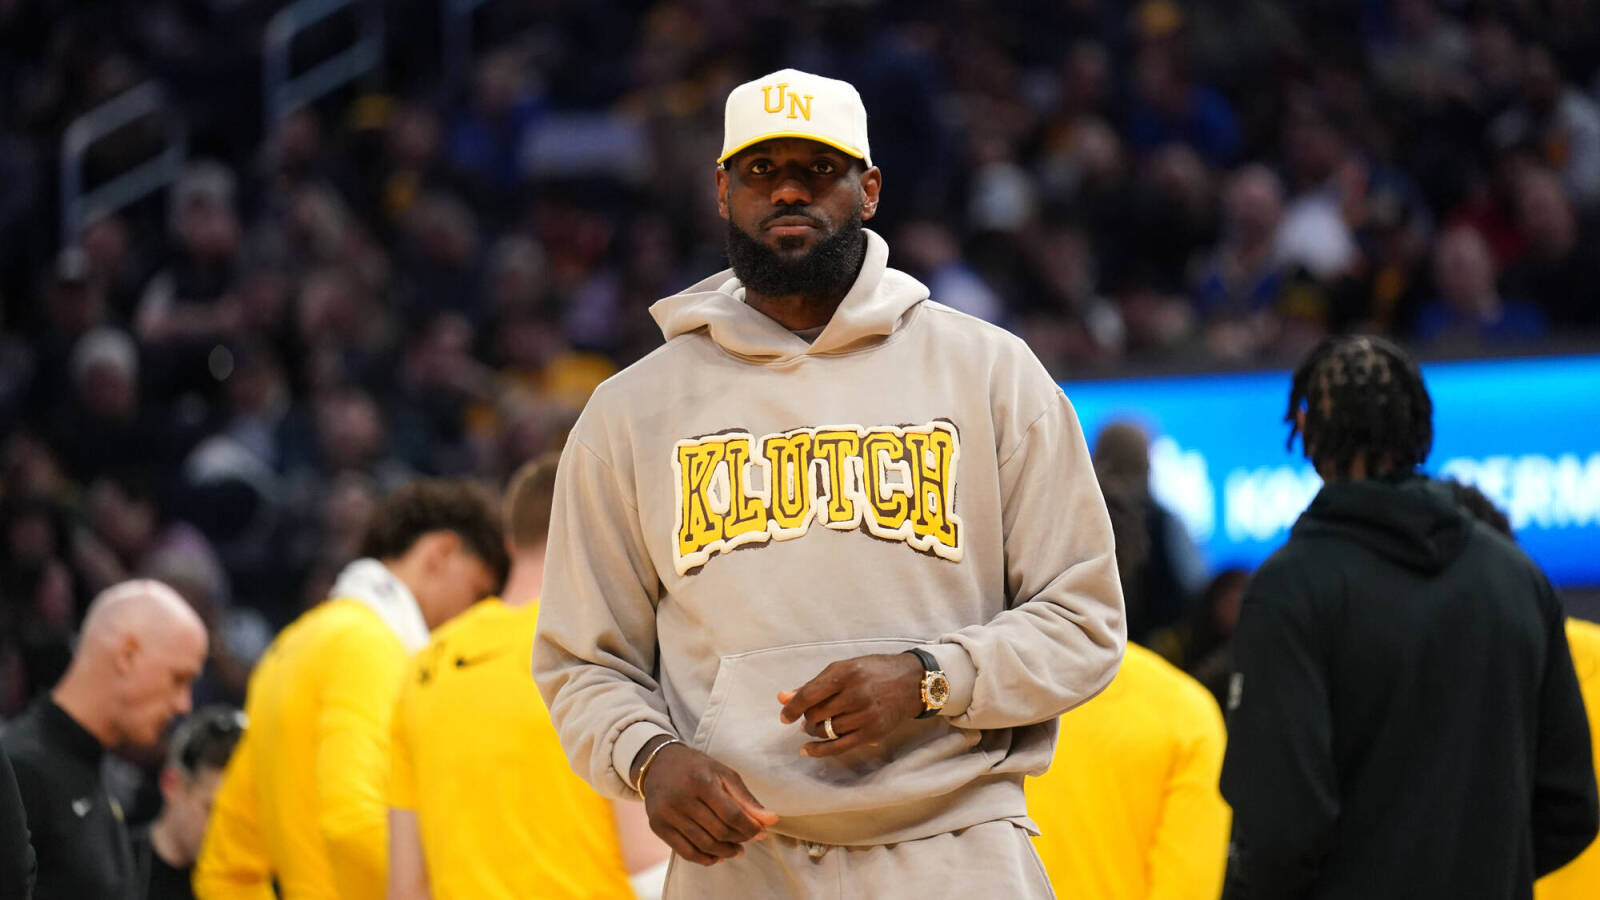 Report: LeBron James eyeing new nine-figure contract with Lakers